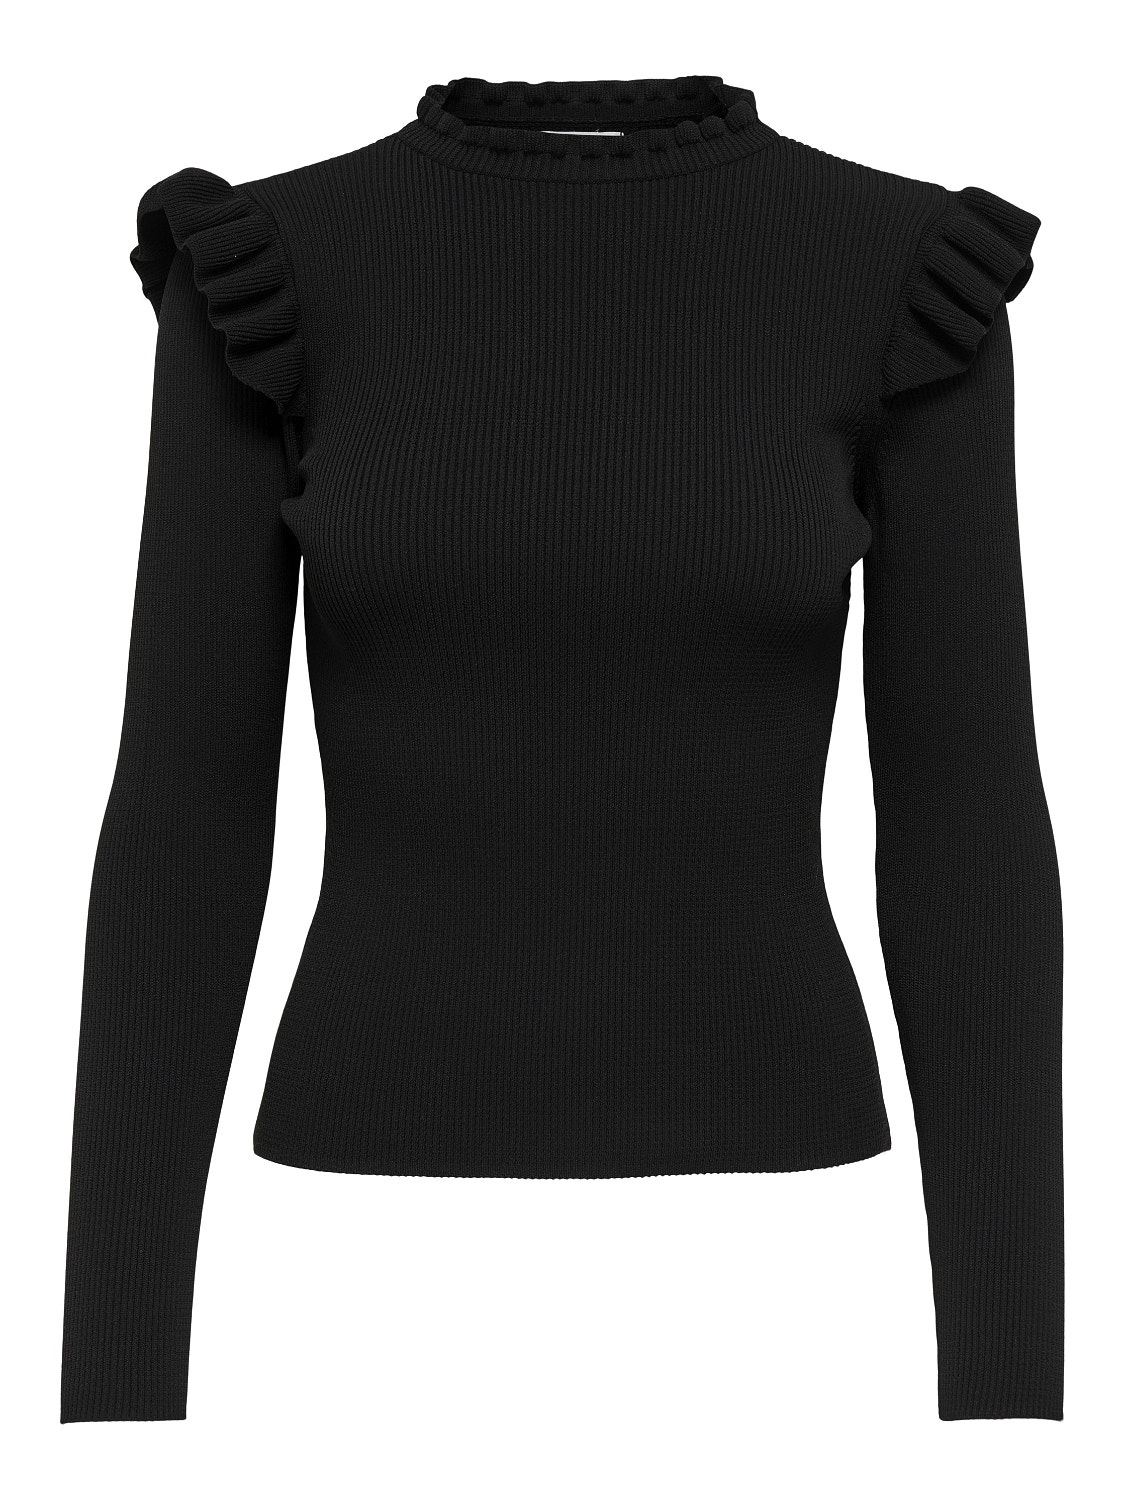 ONLY Frill Long Sleeved Top -Black - 15262455